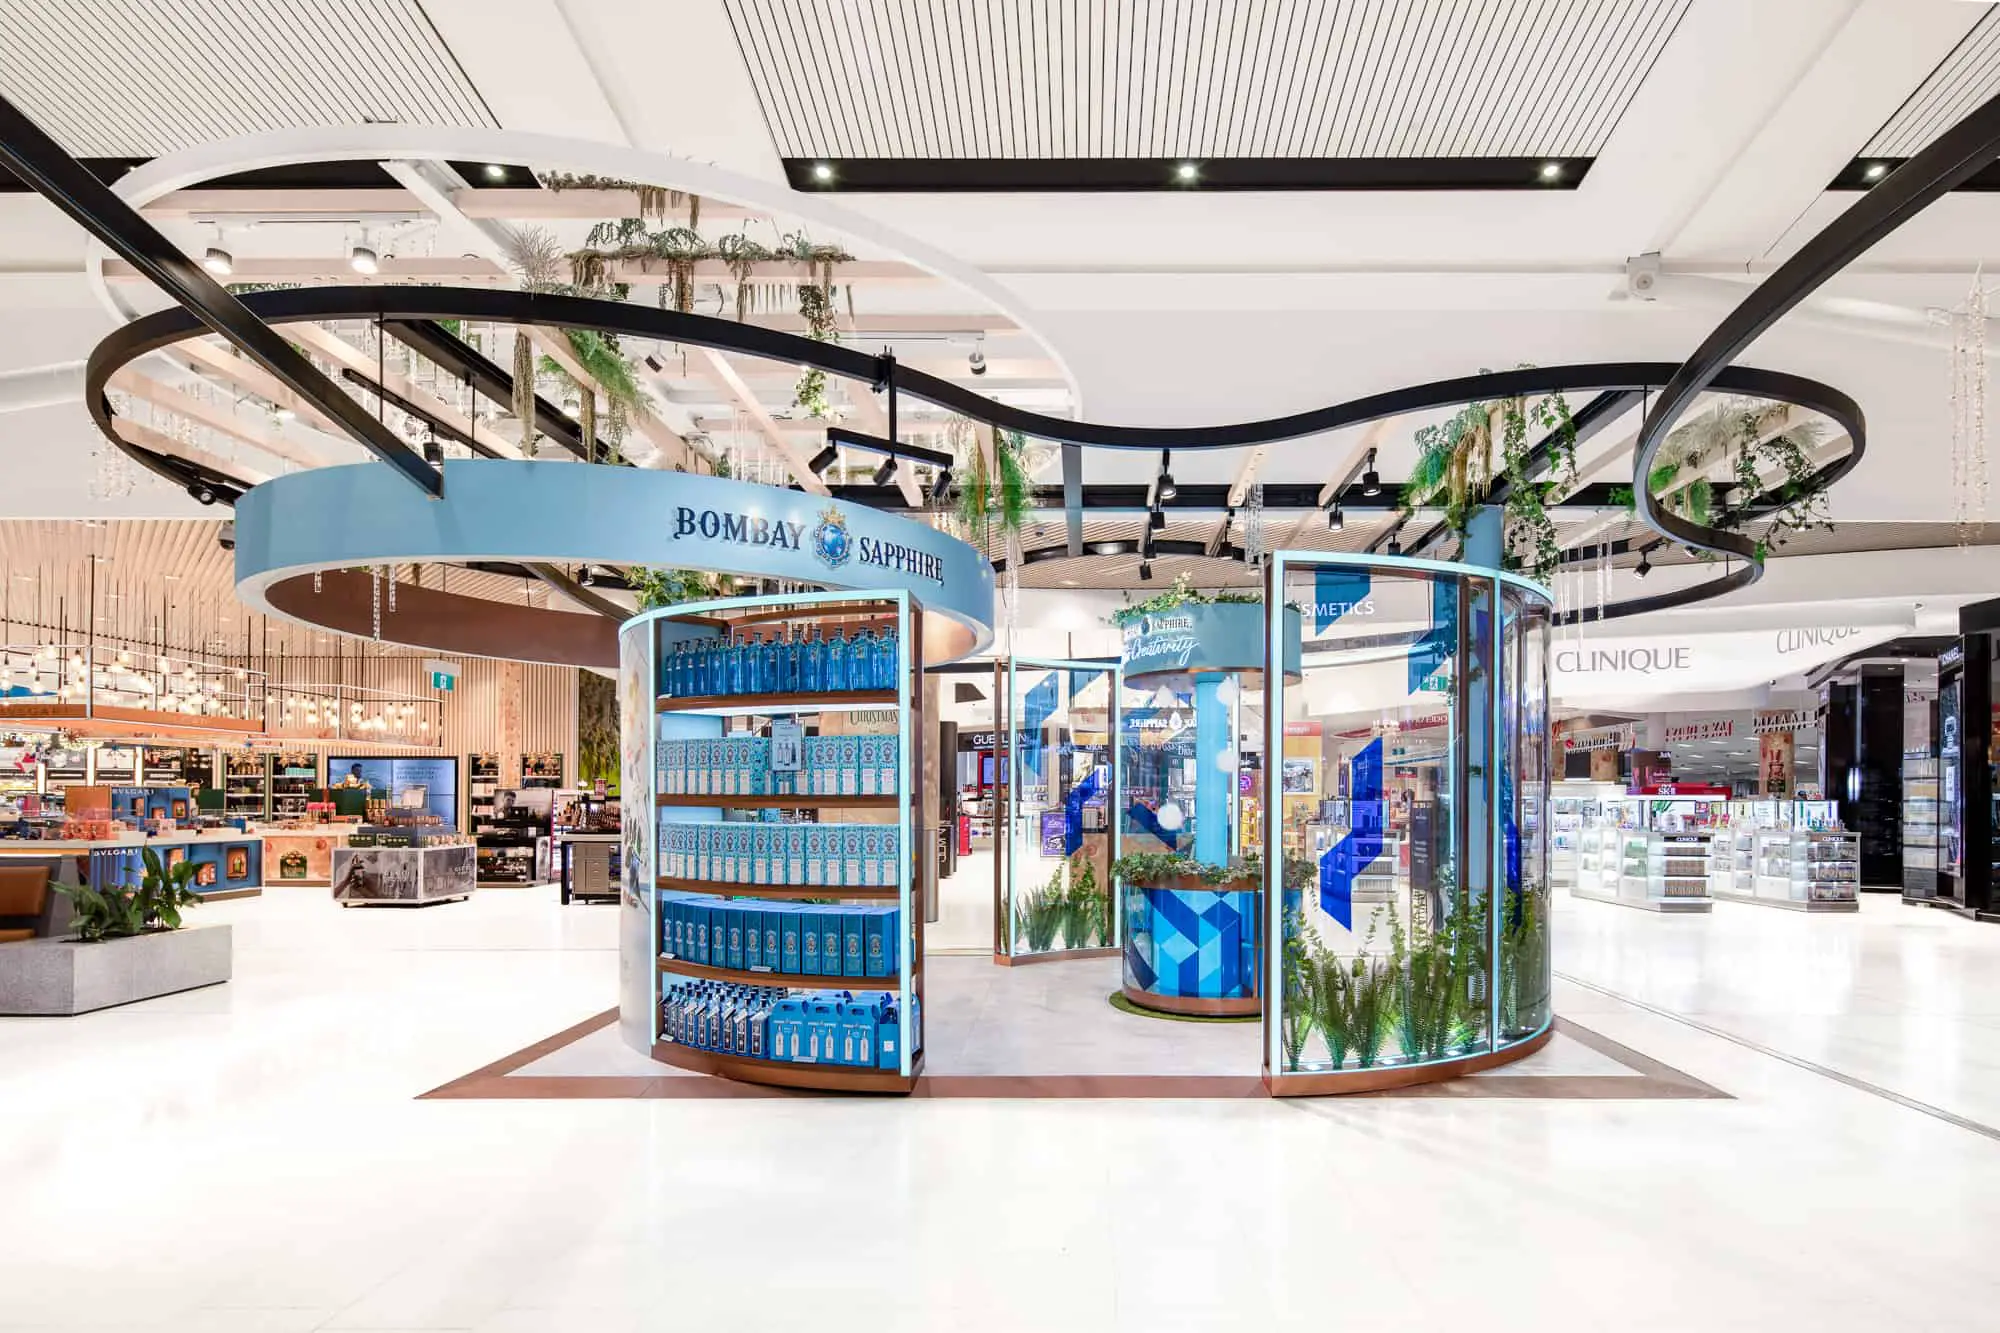 Bacardi partners with Heinemann Australia for immersive Bombay Sapphire summer campaign at Sydney Airport